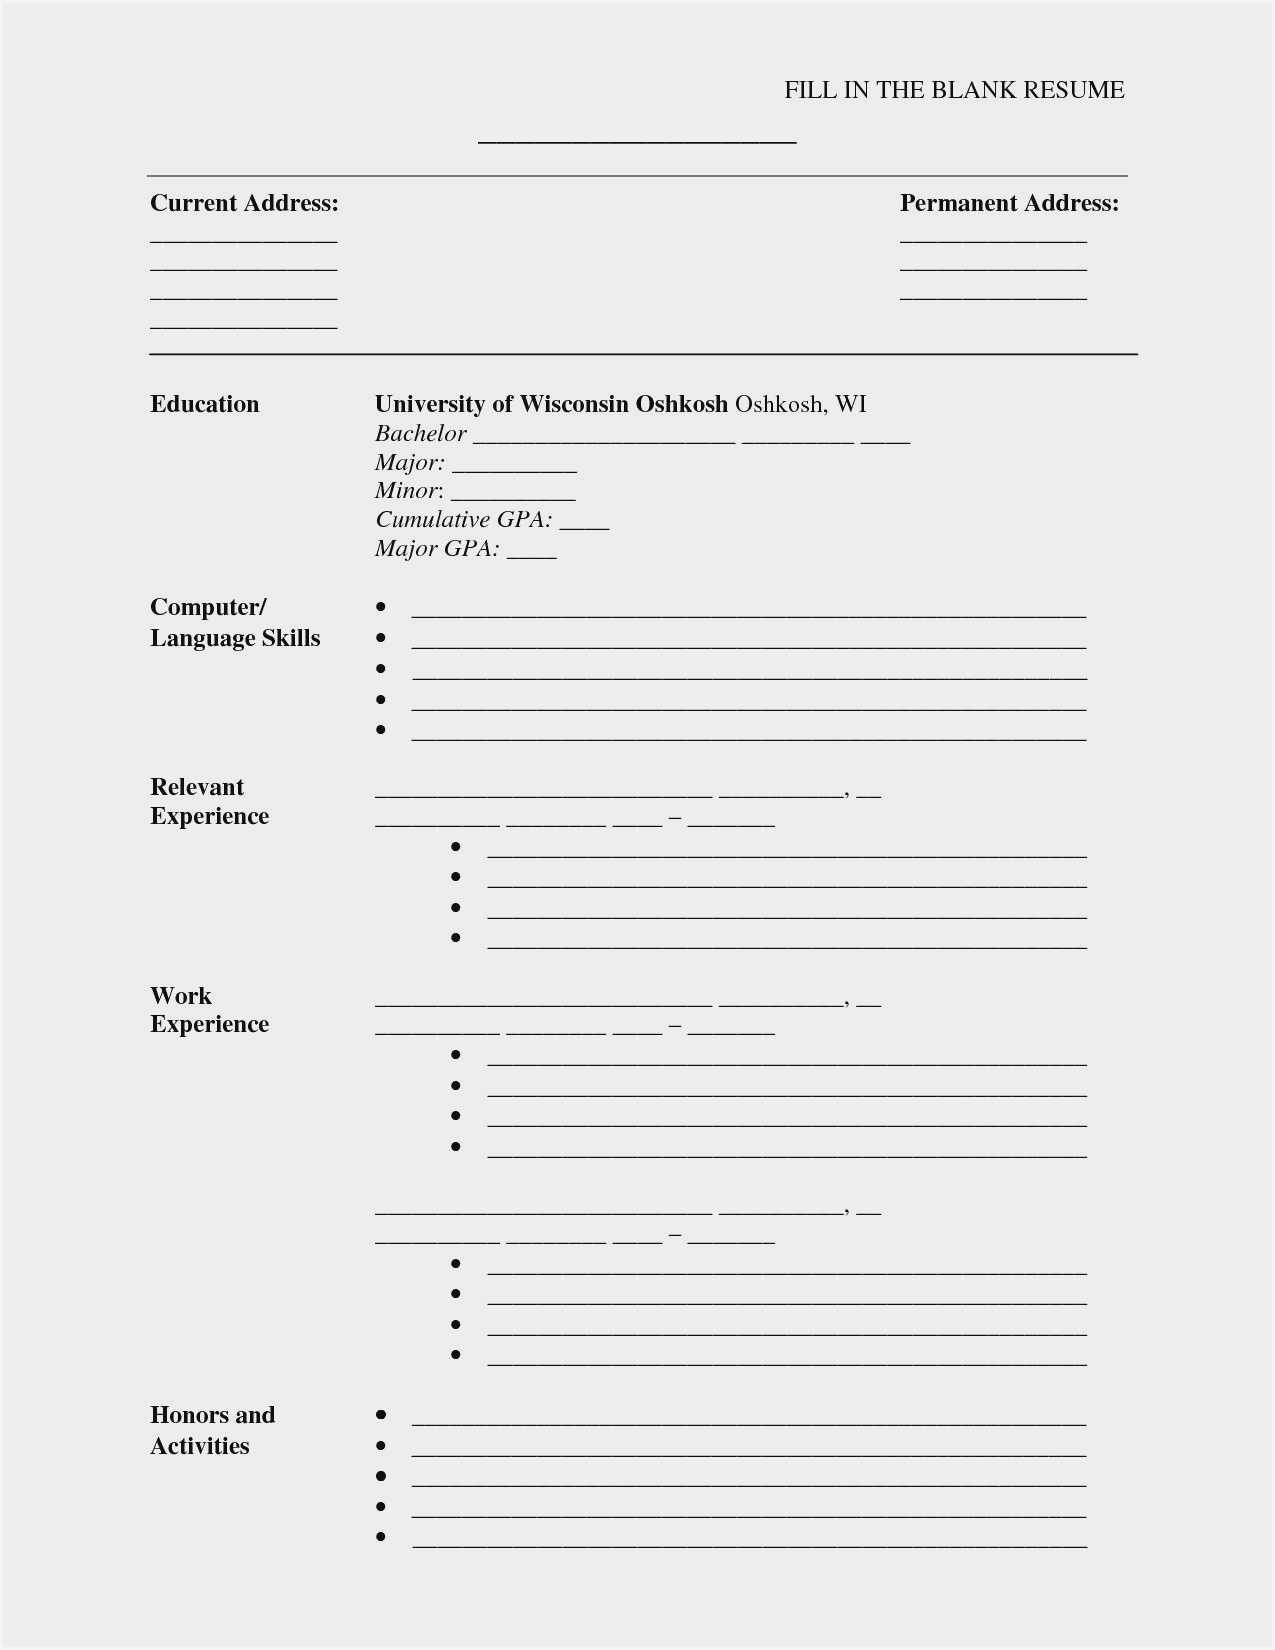 Blank Cv Format Word Download - Resume : Resume Sample #3945 With Blank Resume Templates For Microsoft Word